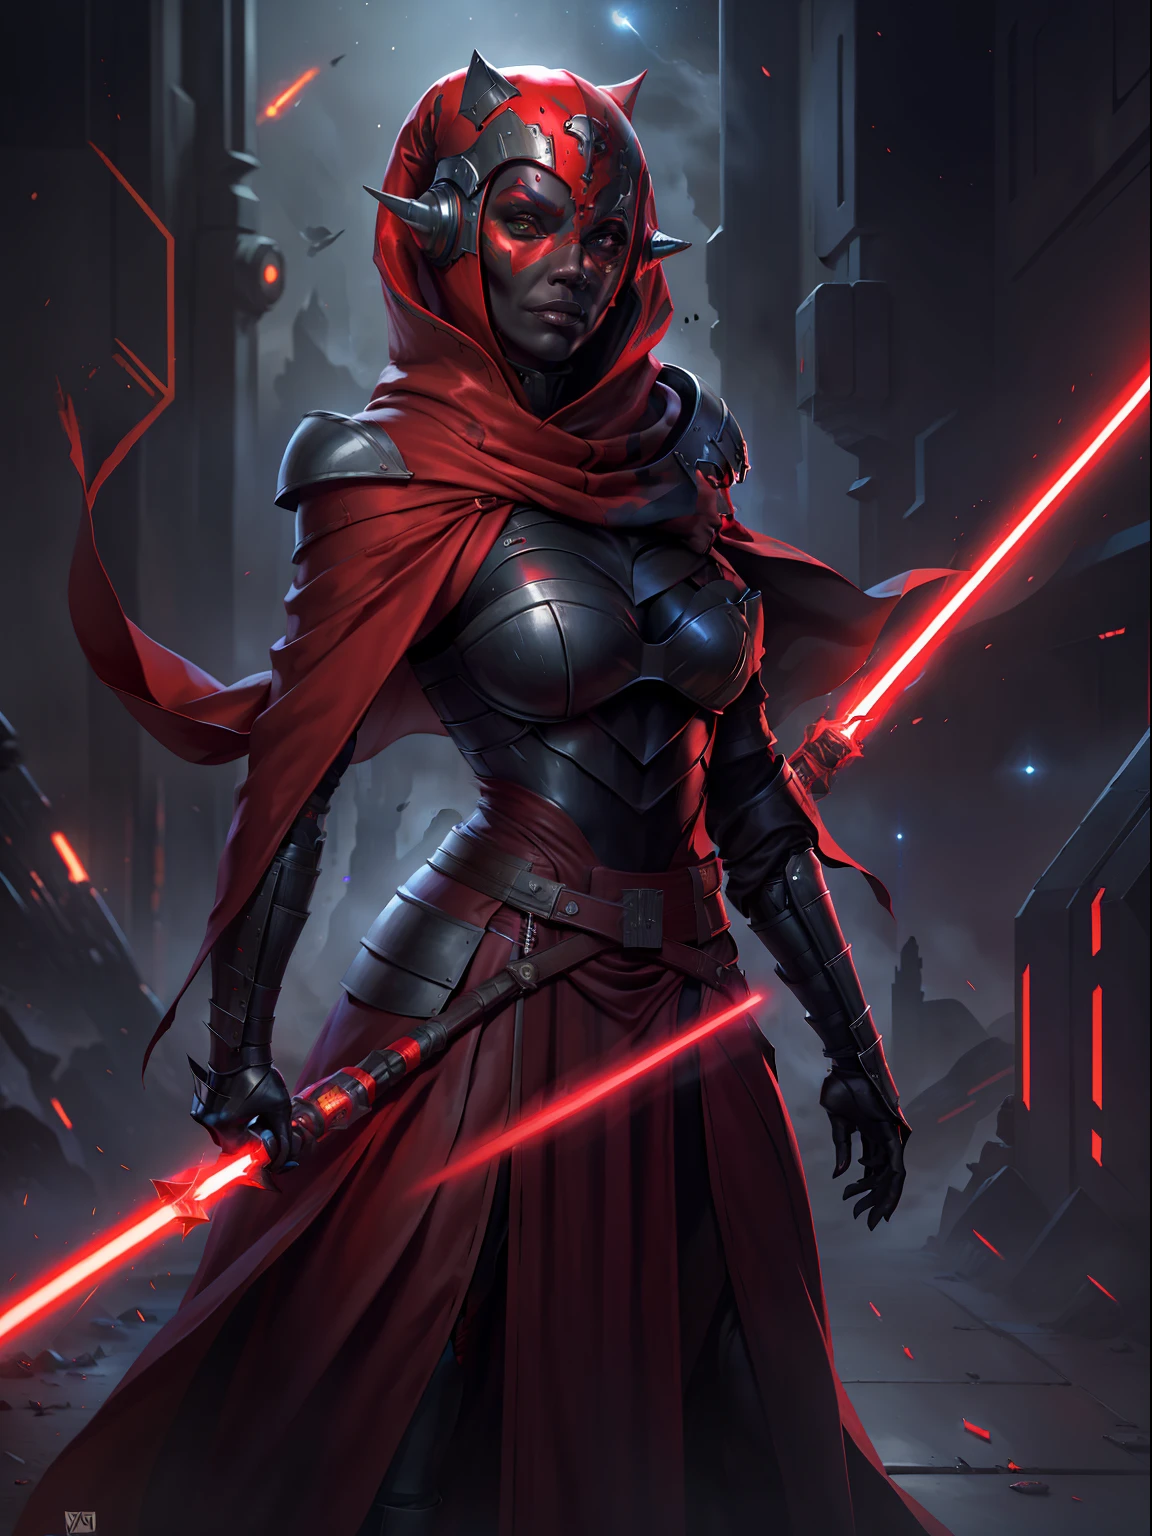 modest, robes, cape, cloak, heavily armored, red skin, Twi'lek, athletic, slender, muscular, wearing heavy black stealth armor, evil space knight, space samurai, dual red lightsabers, Star Wars